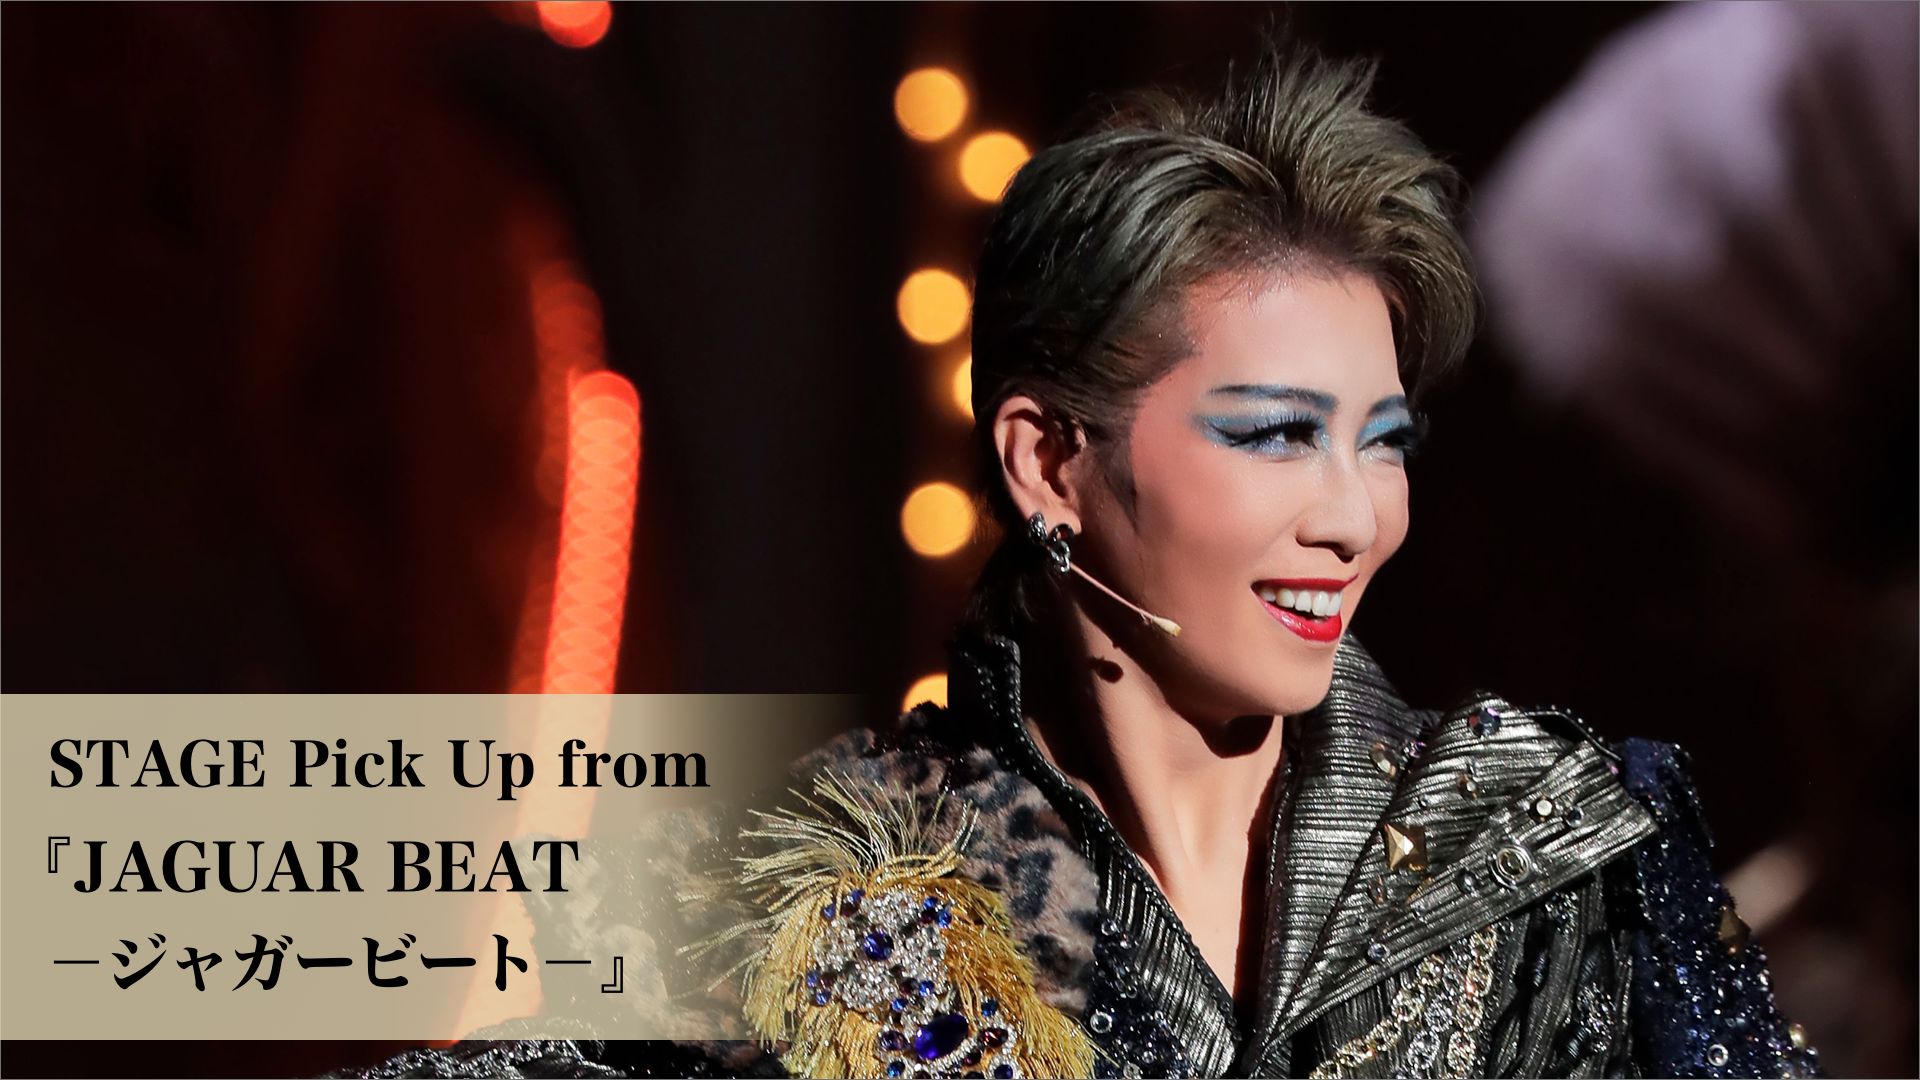 STAGE Pick Up from『JAGUAR BEAT-ジャガービート-』